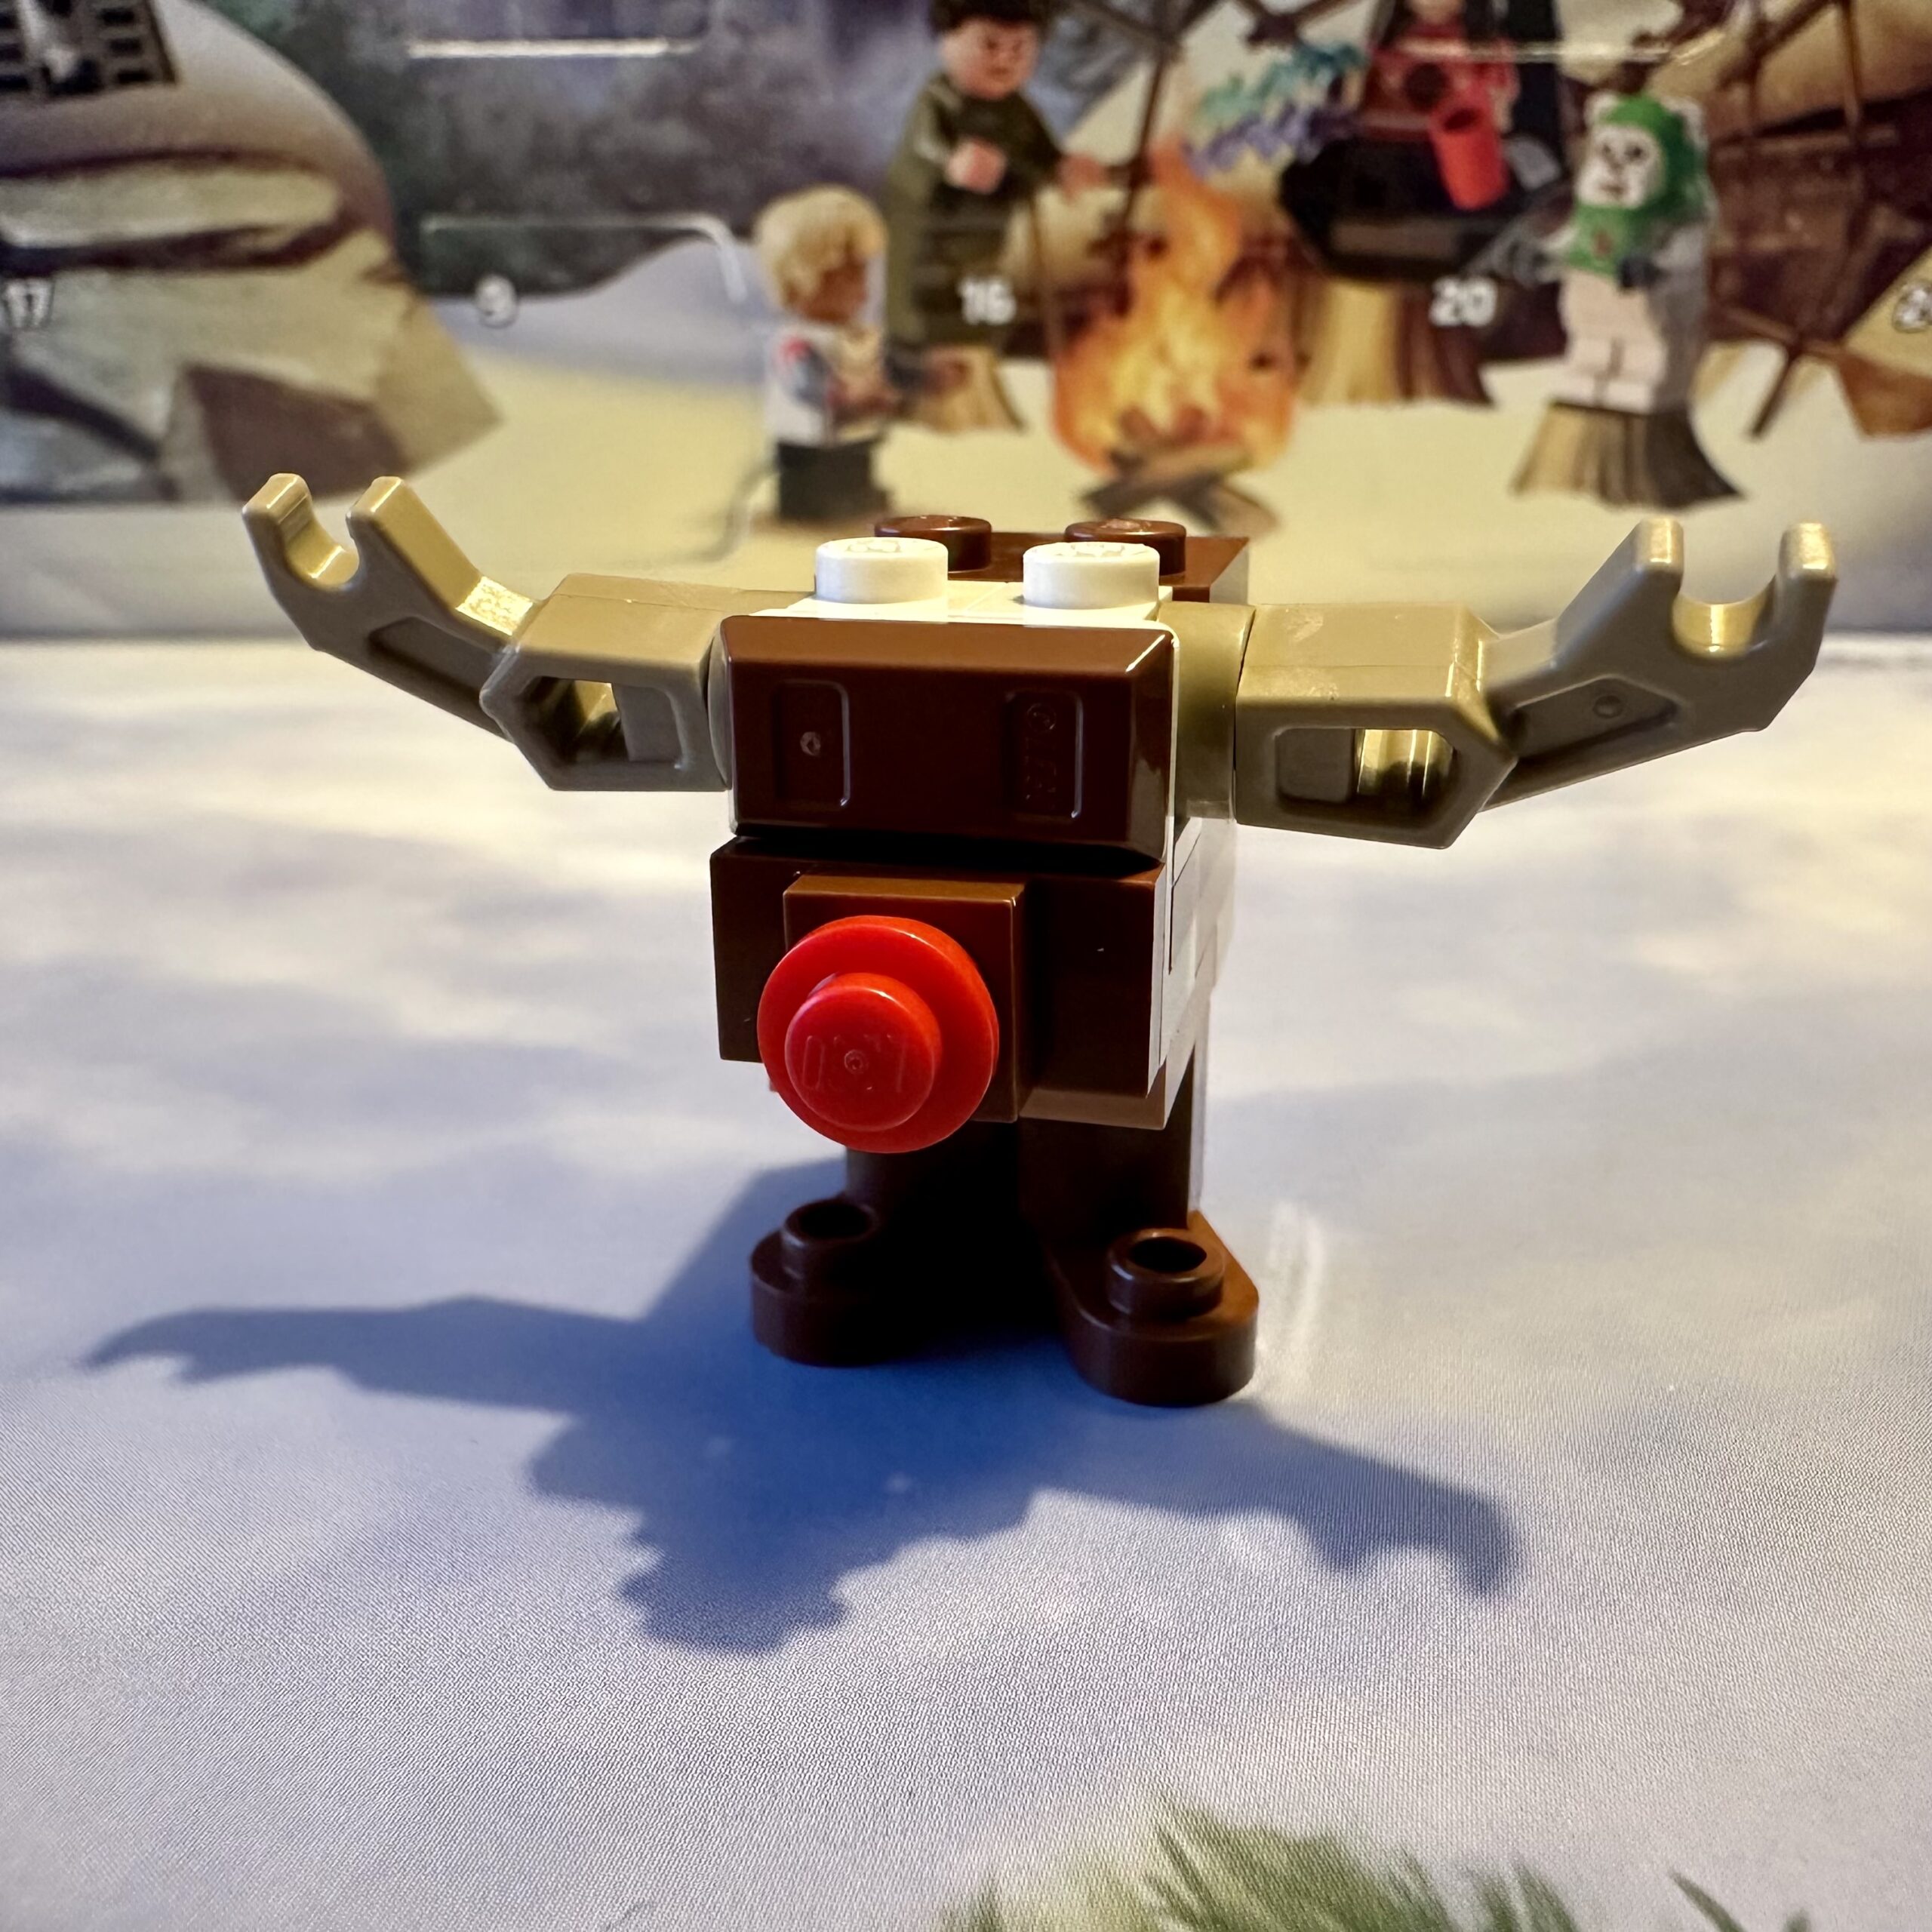 LEGO micro-build of a brown Star Wars GONK droid dressed as Rudolph with tan antlers and a red nose.